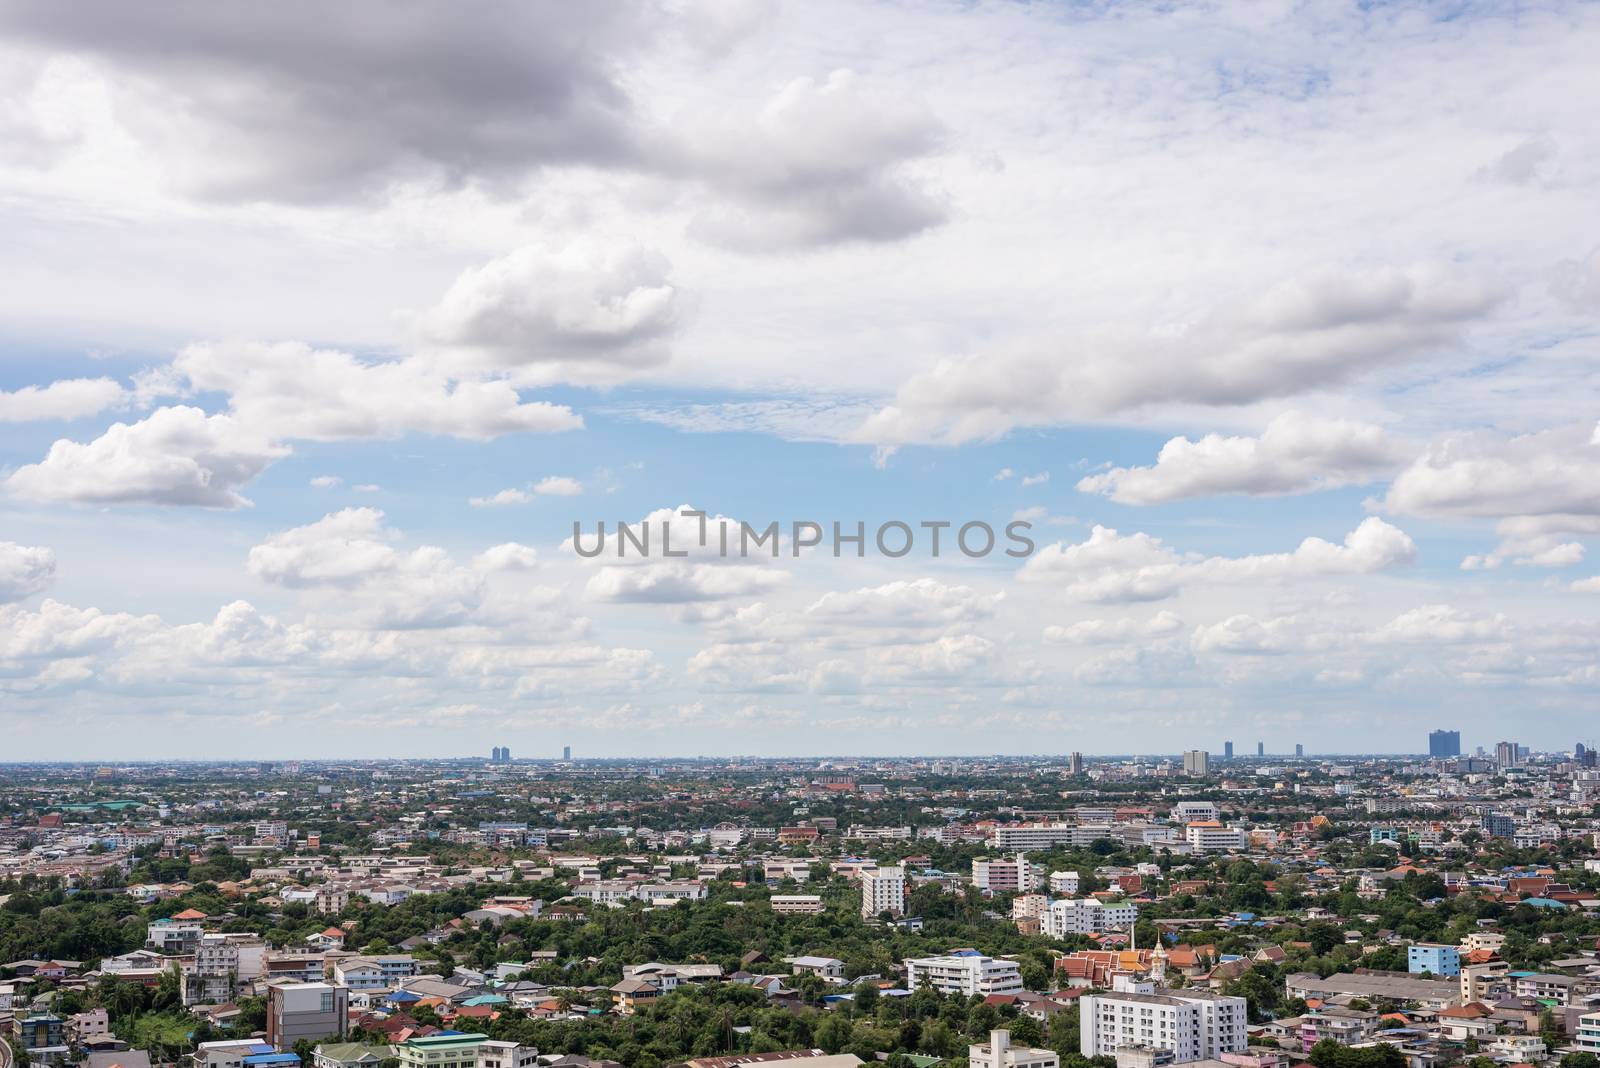 The Bangkok cityscape from skyscraper view with clouds and blue sky.